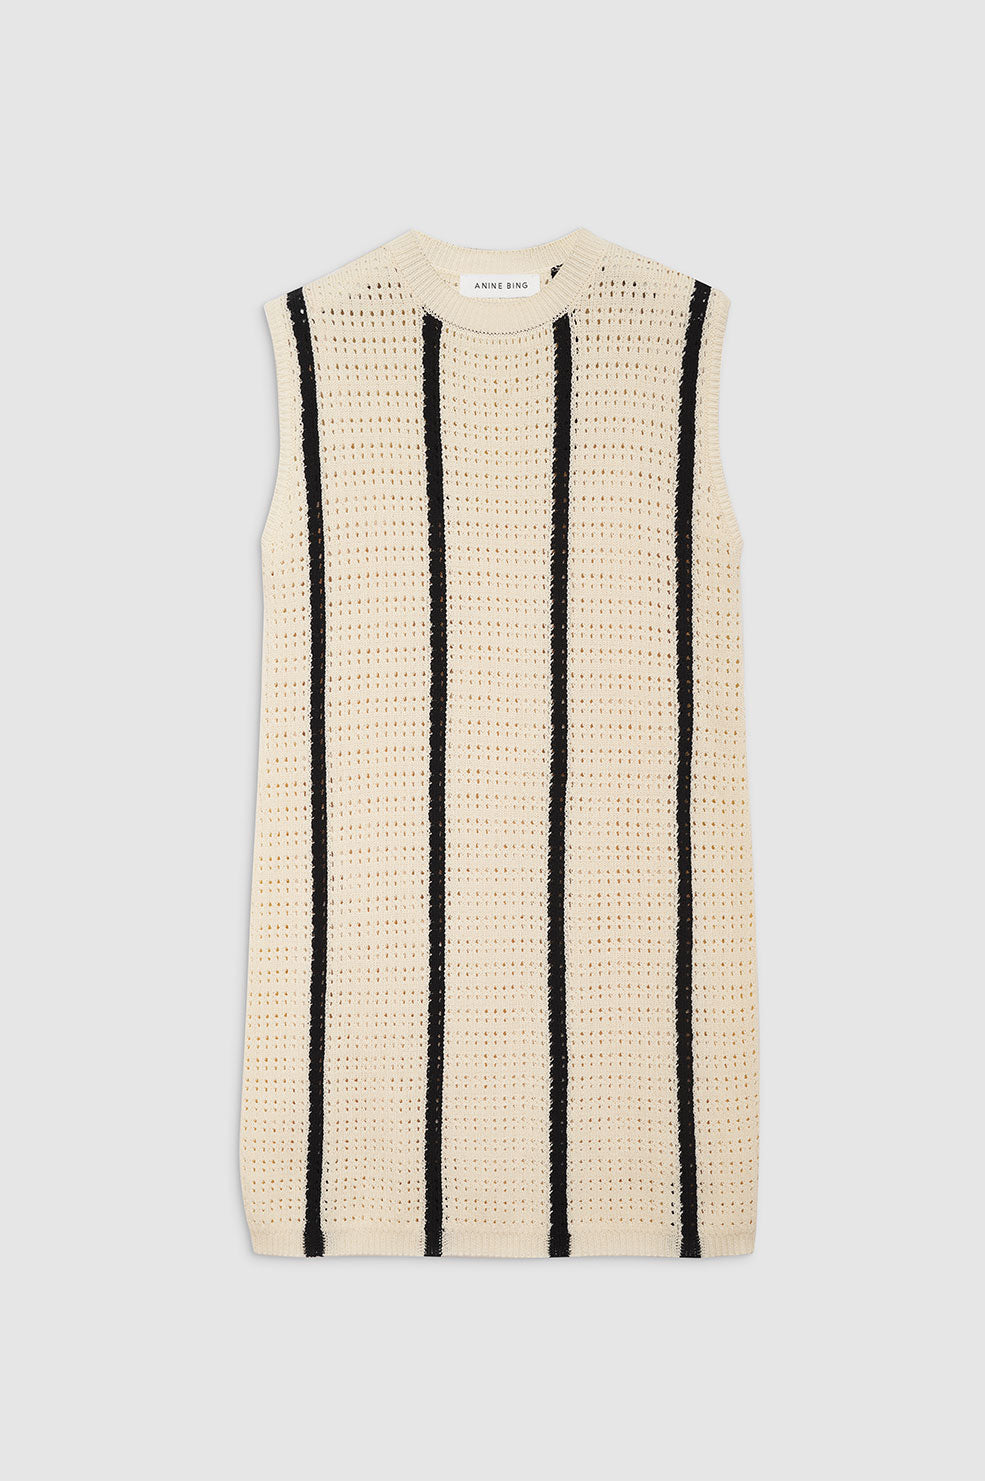 ANINE BING Lanie Dress - Ivory And Black Stripe - Front View